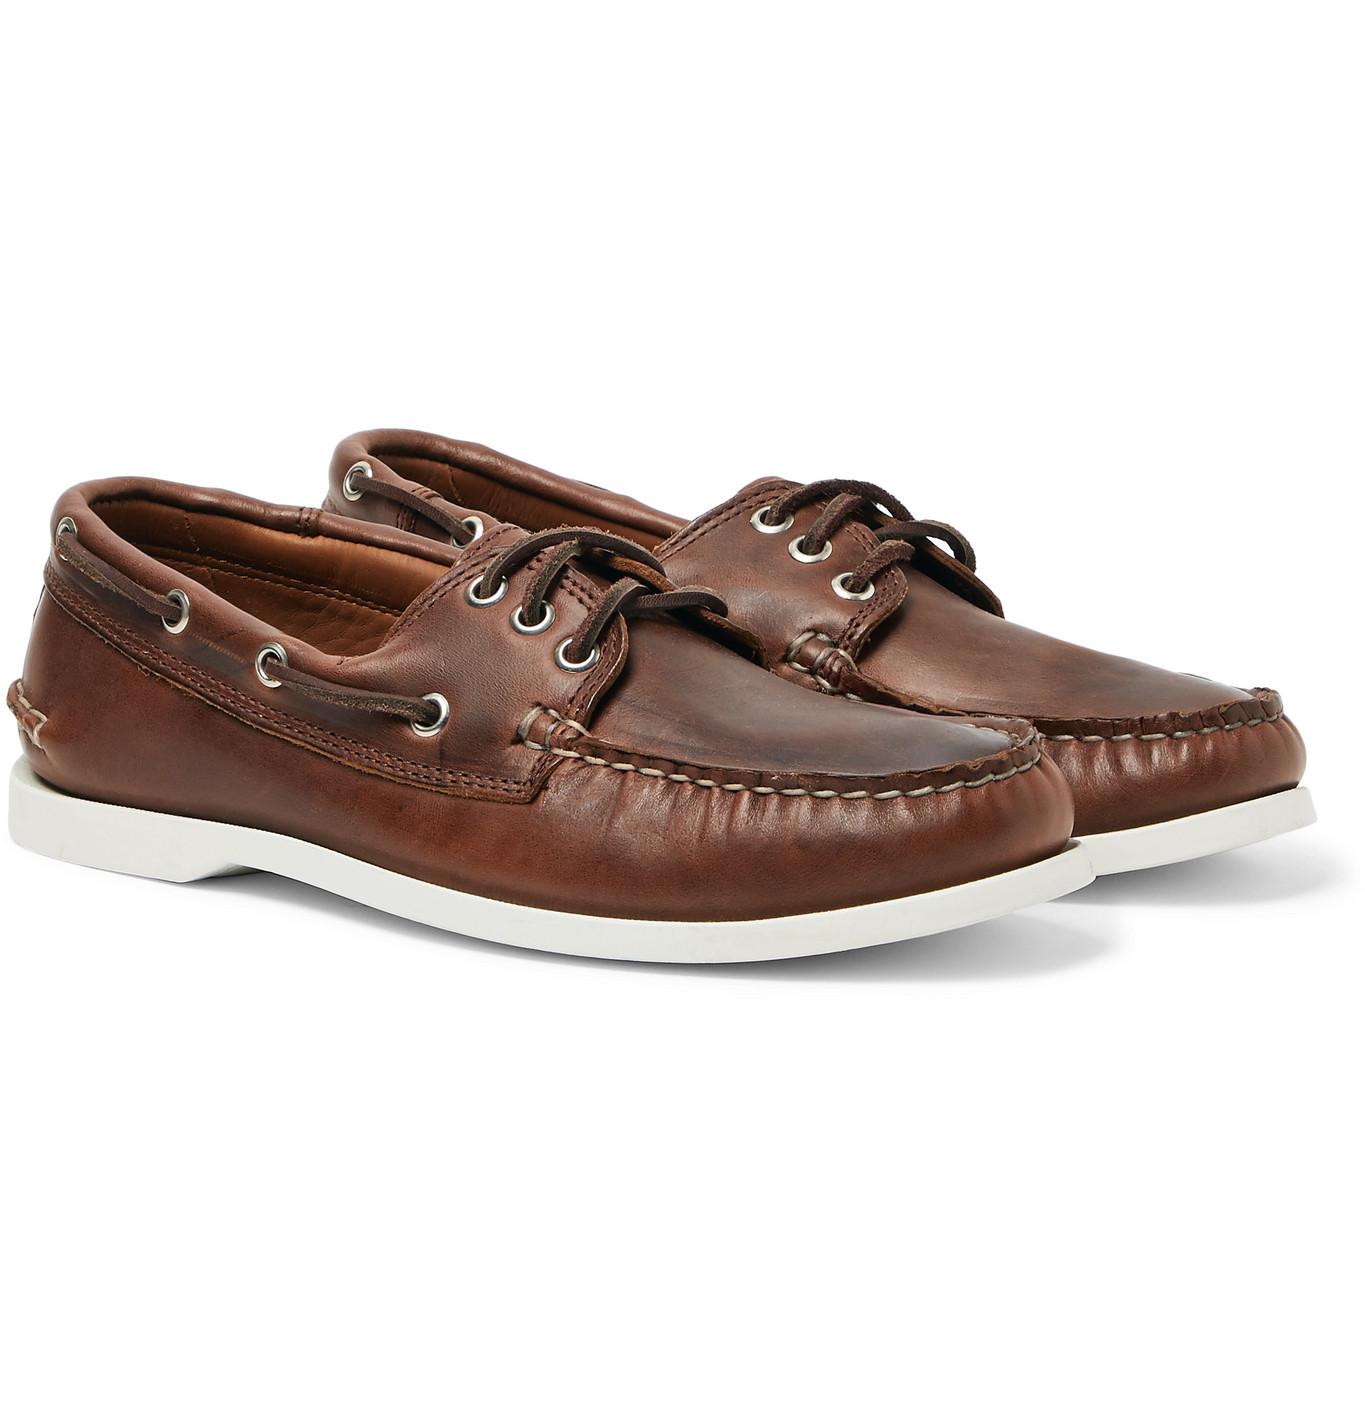 Quoddy Downeast Leather Boat Shoes in Brown for Men - Lyst